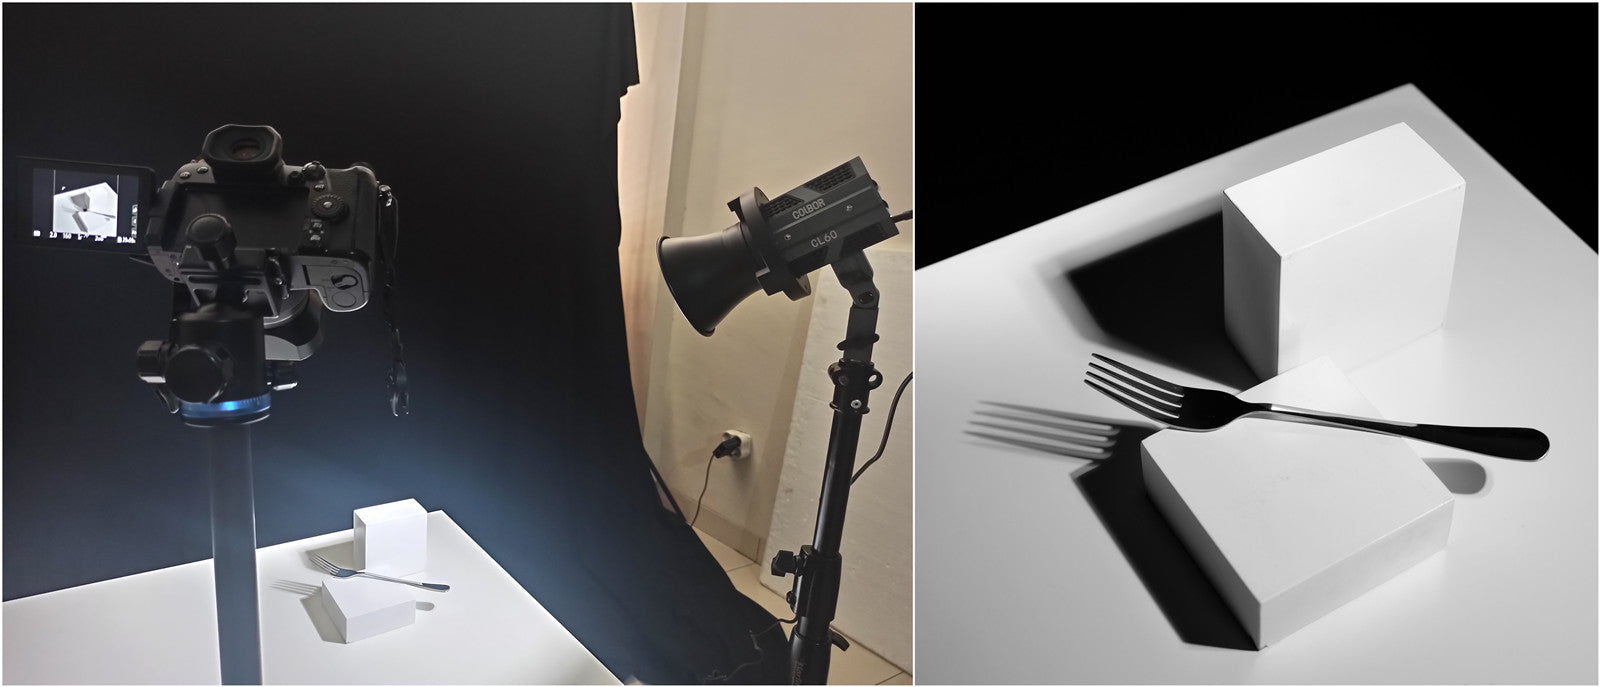 COLBOR CL60 offers LED lighting for product photography. At the right is the output product photo.